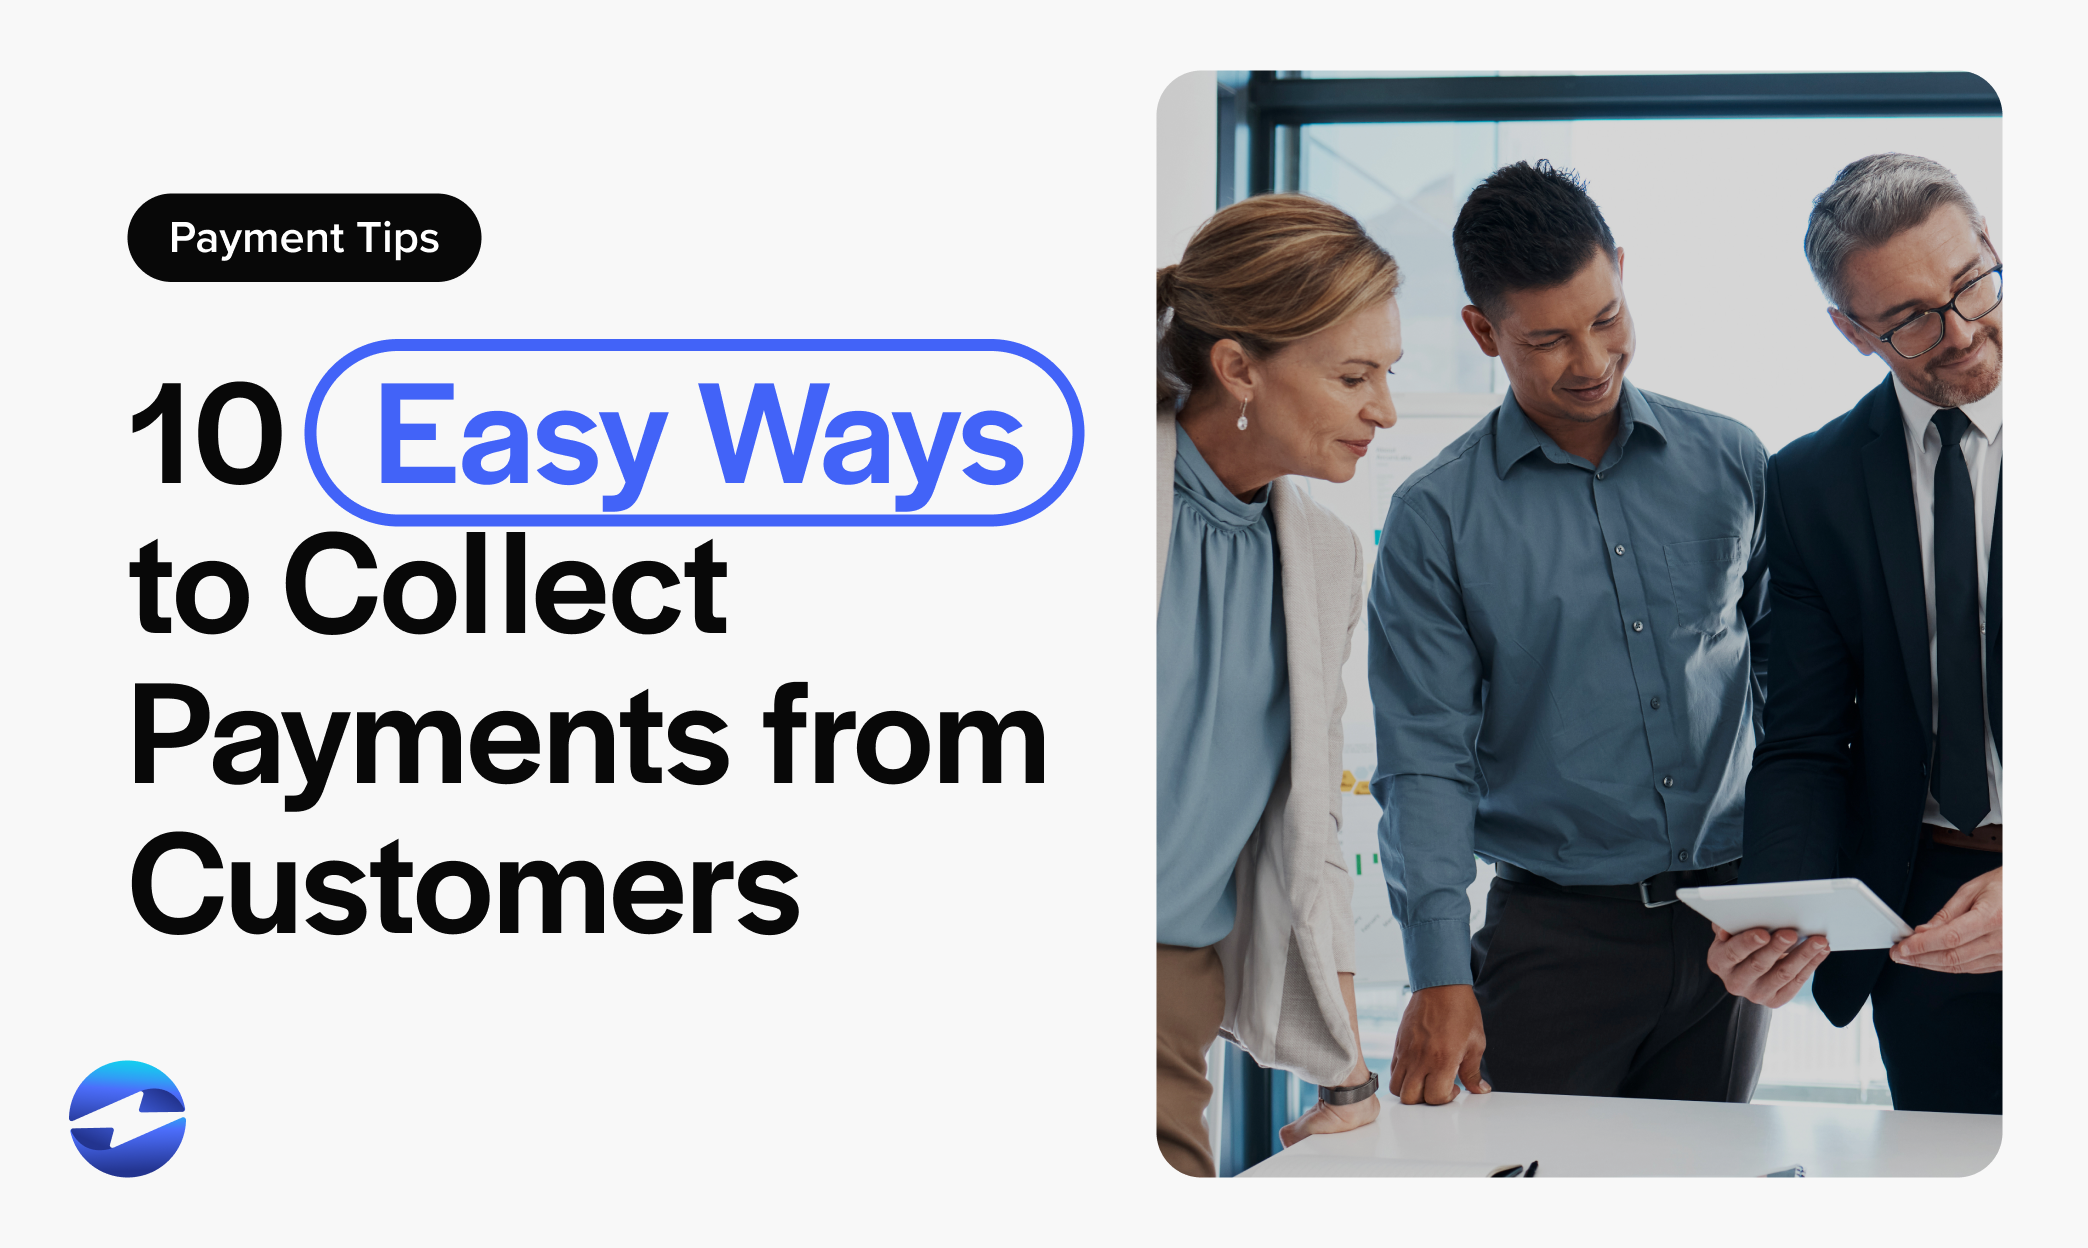 10 Easy Ways to Collect Payments from Customers